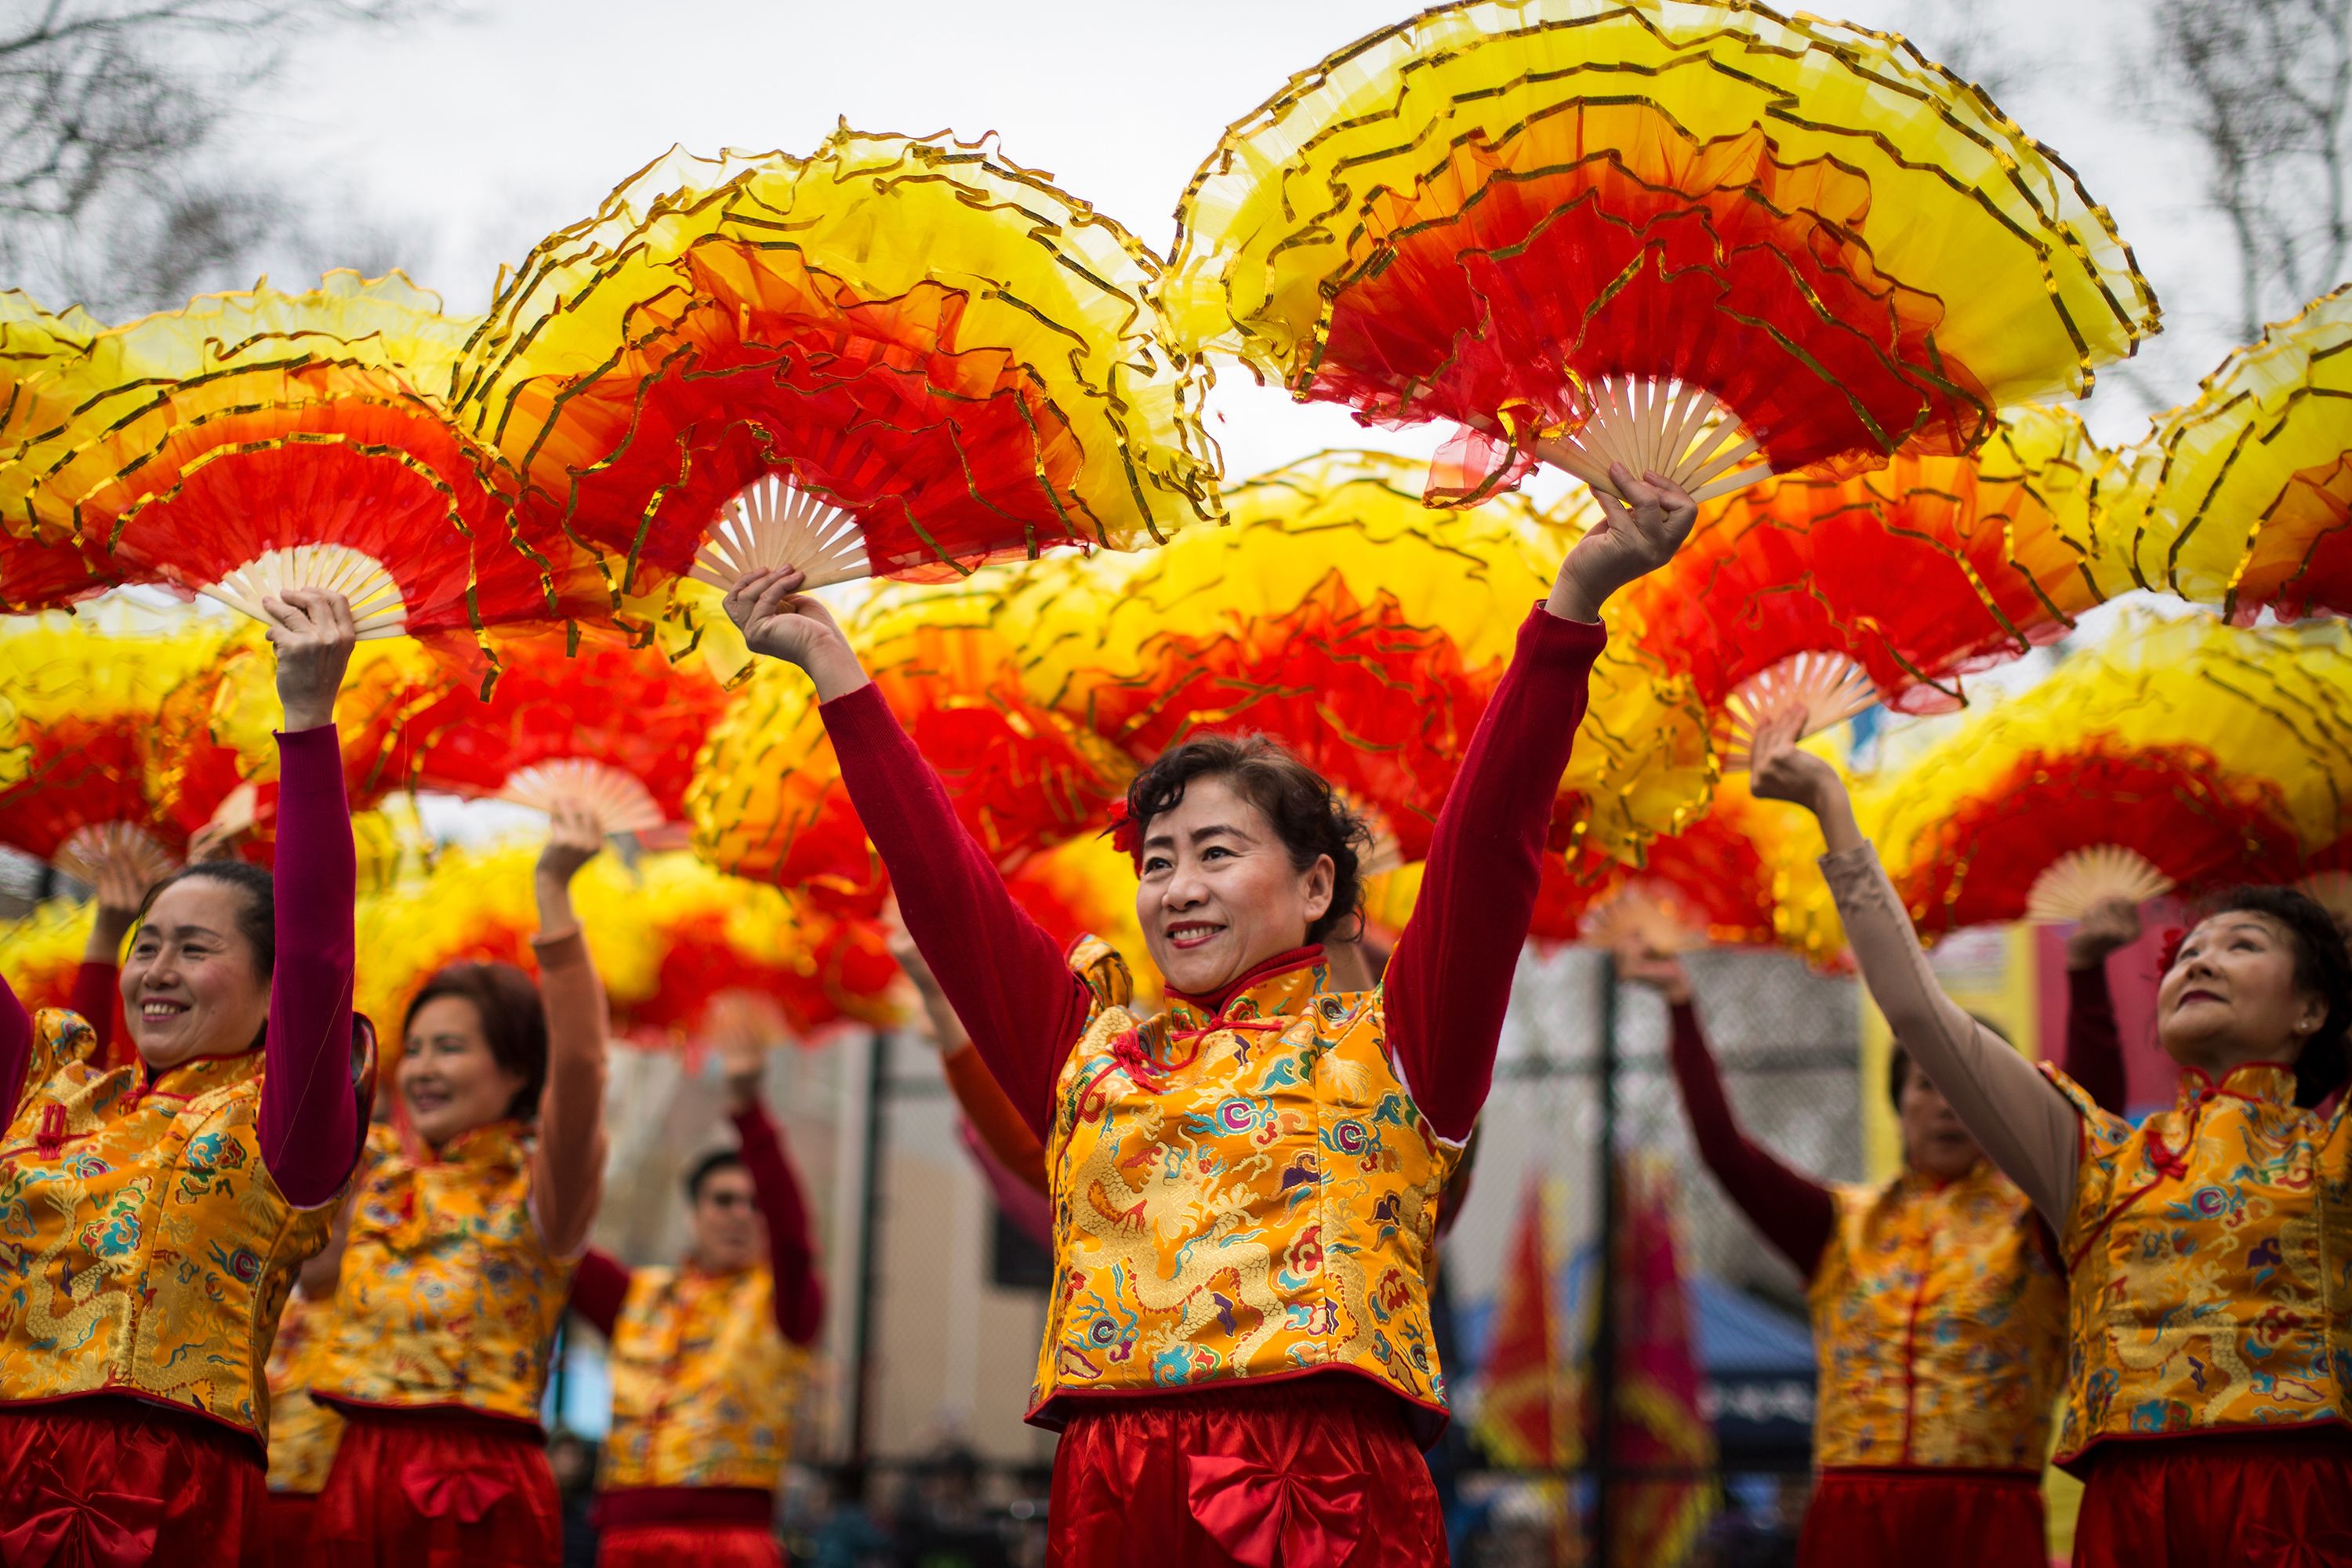 Lunar New Year traditions, old and new